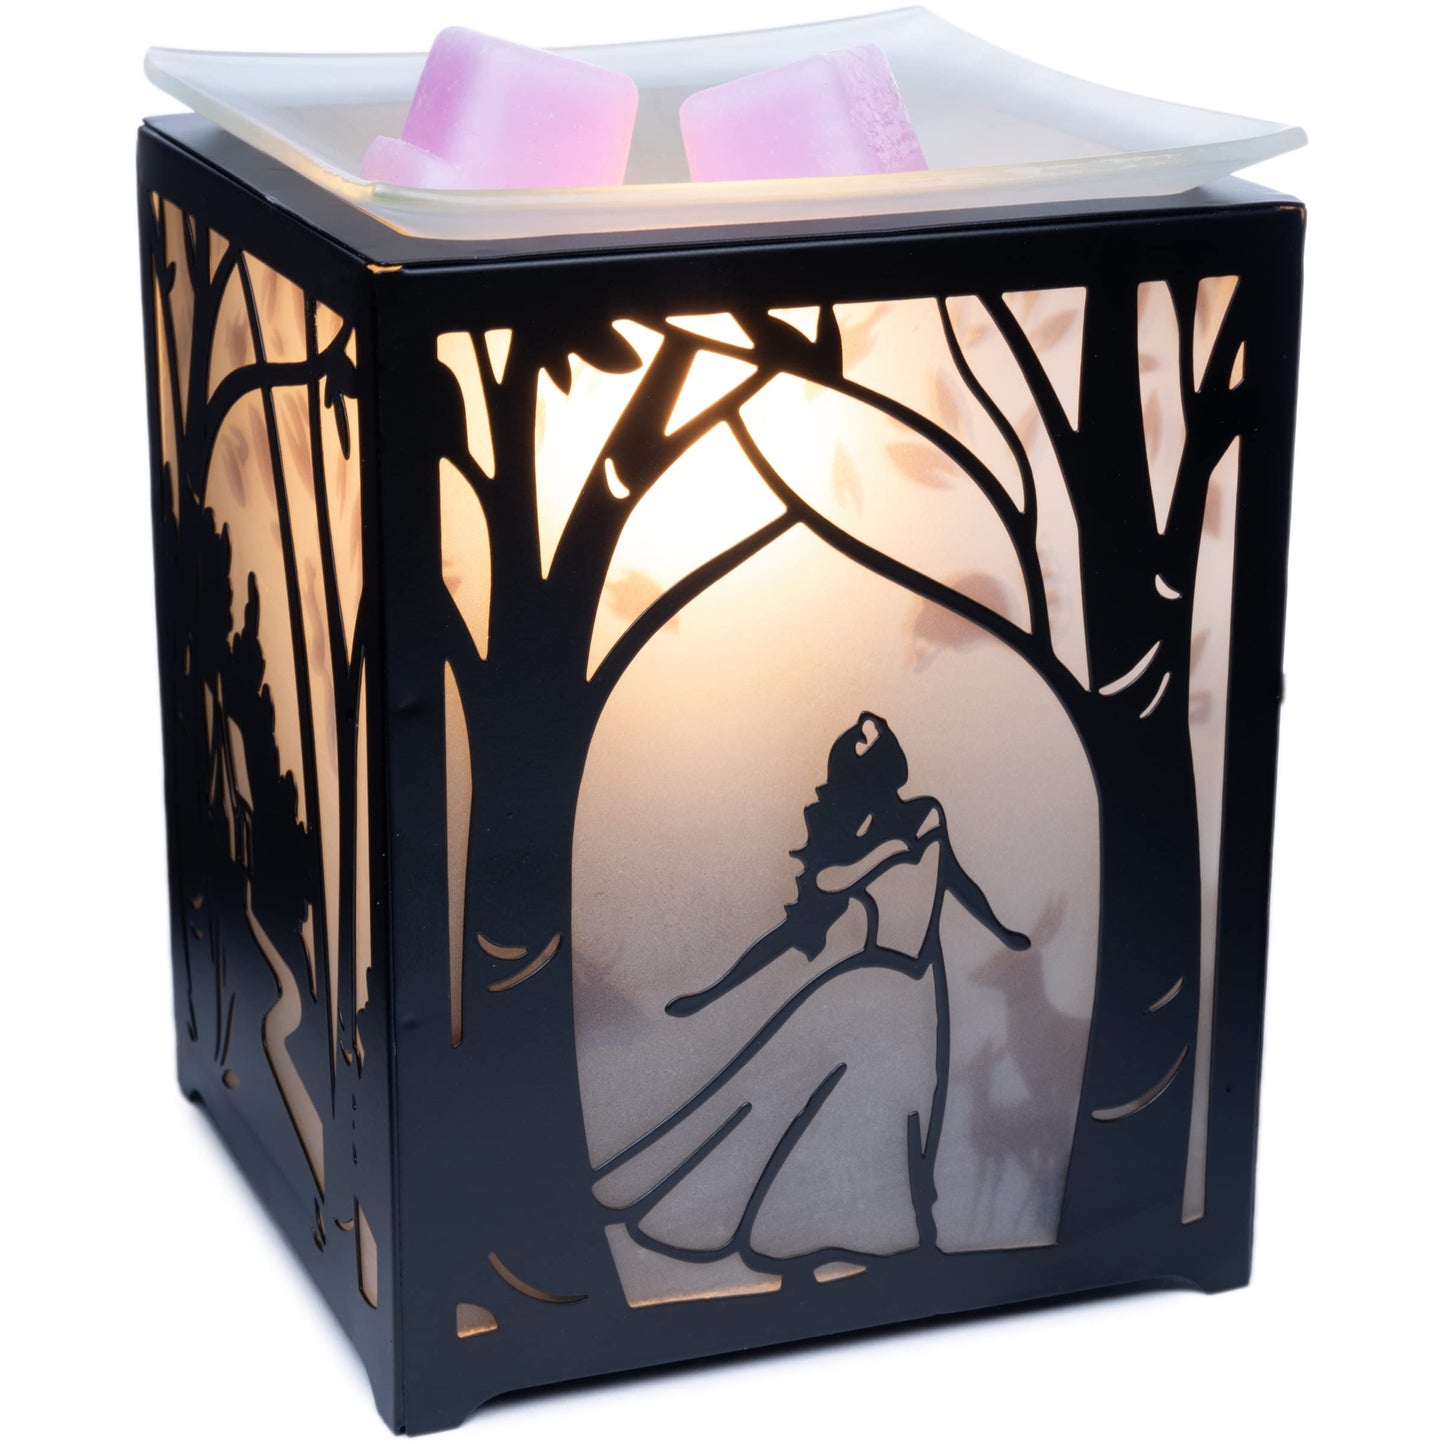 Scentsationals Fantasy Collection - Scented Wax Warmer - Fantasy Wax Cube Melter & Burner - Electric Winter Fragrance Home Air Freshener Gift (Never Grow Up)